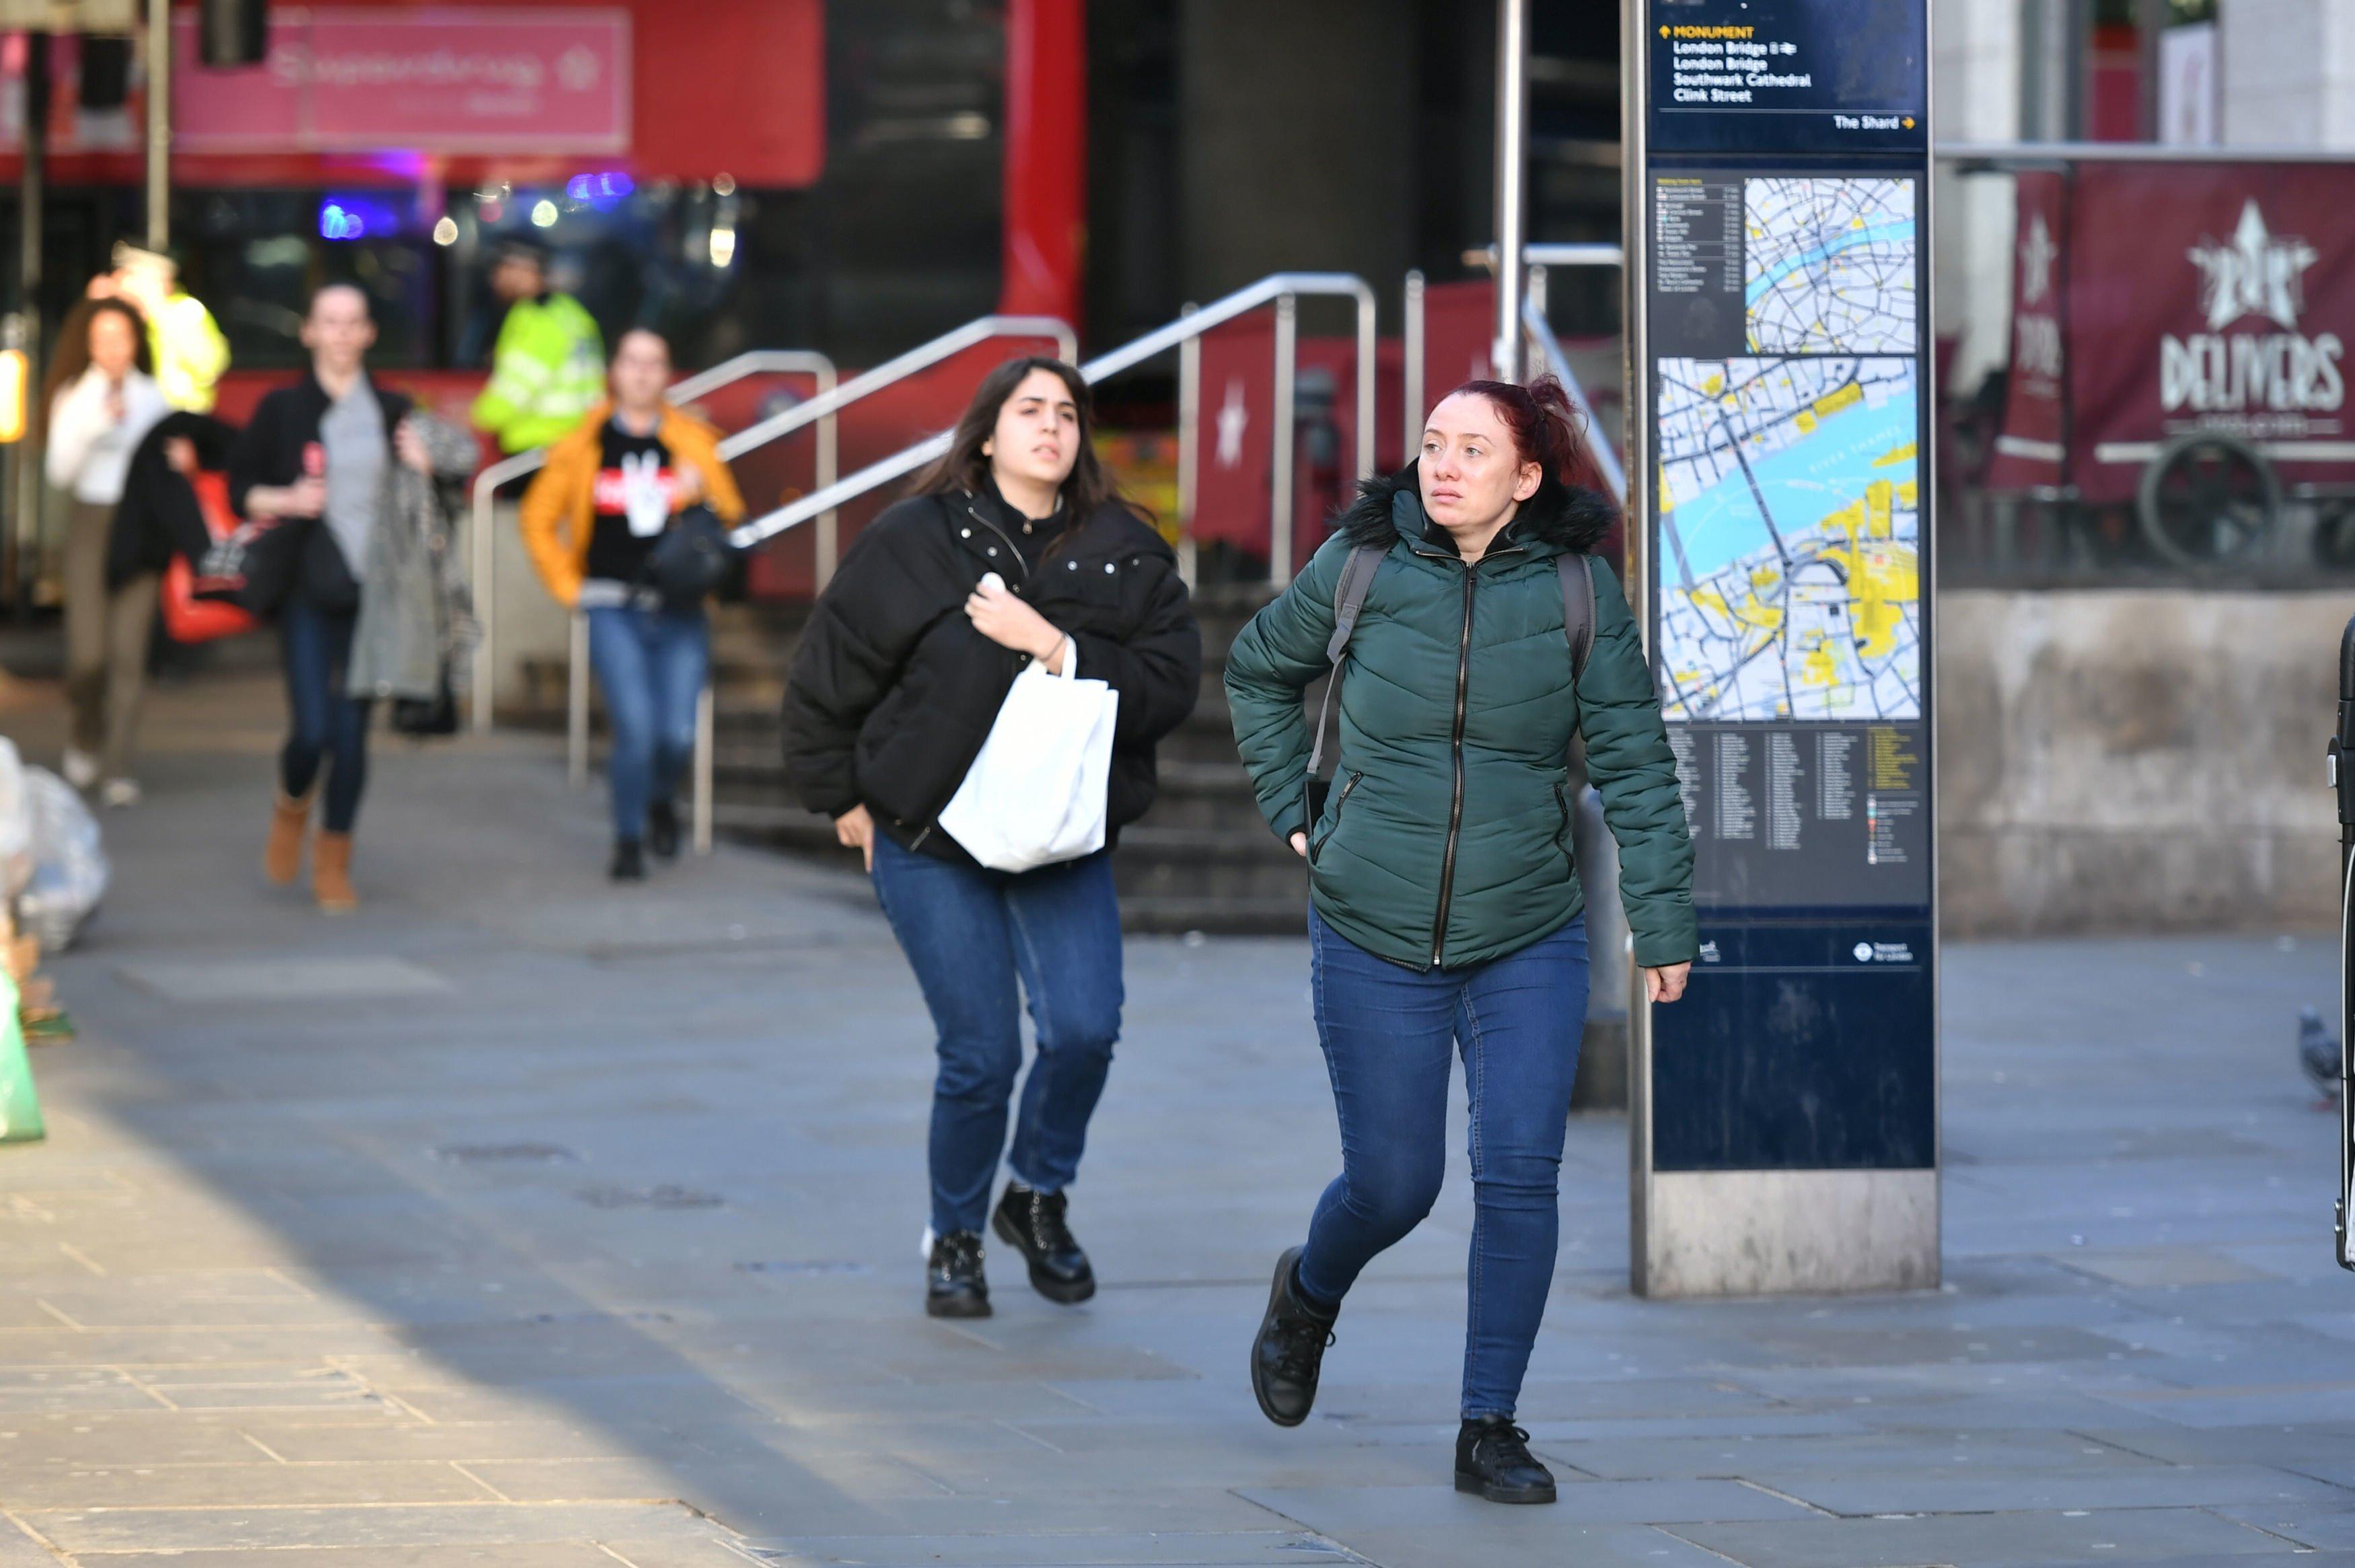 People heading away from the vicinity of Borough Market in London after police told them to leave the area. PA Photo. Picture date: Friday November 29, 2019. See PA story POLICE LondonBridge. Photo credit should read: Dominic Lipinski/PA Wire